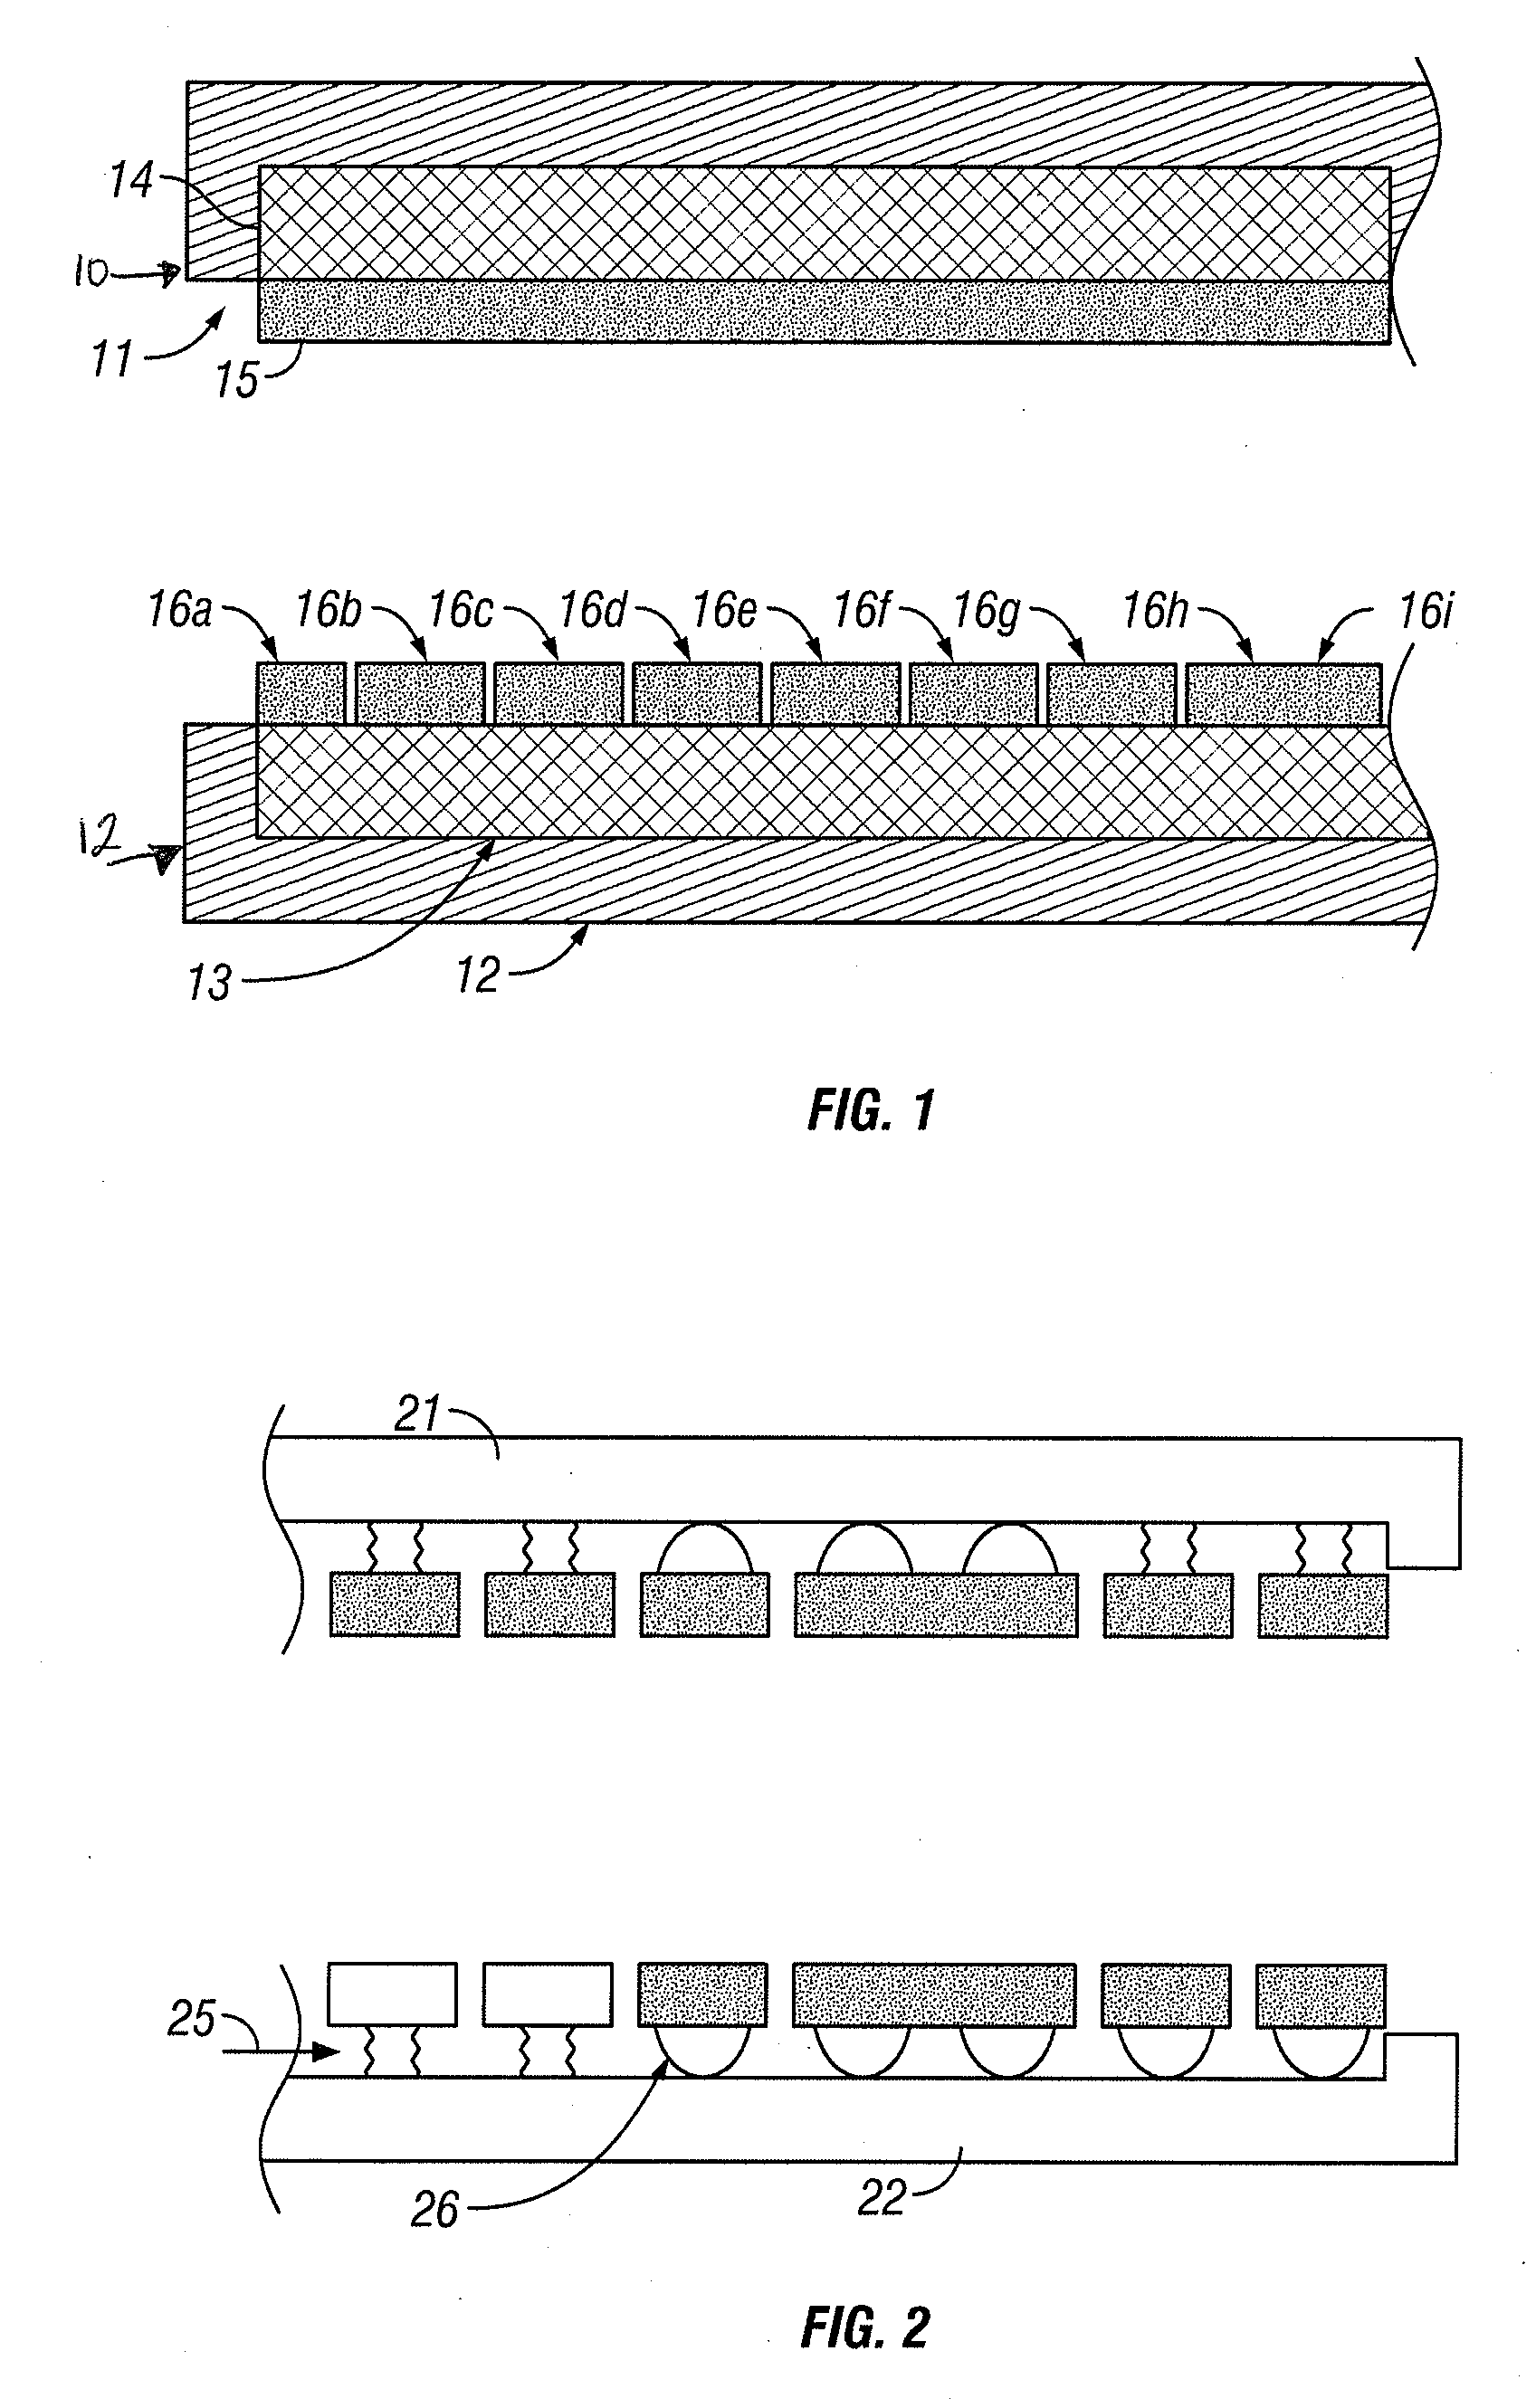 Method and Apparatus for Surgical Electrocautery